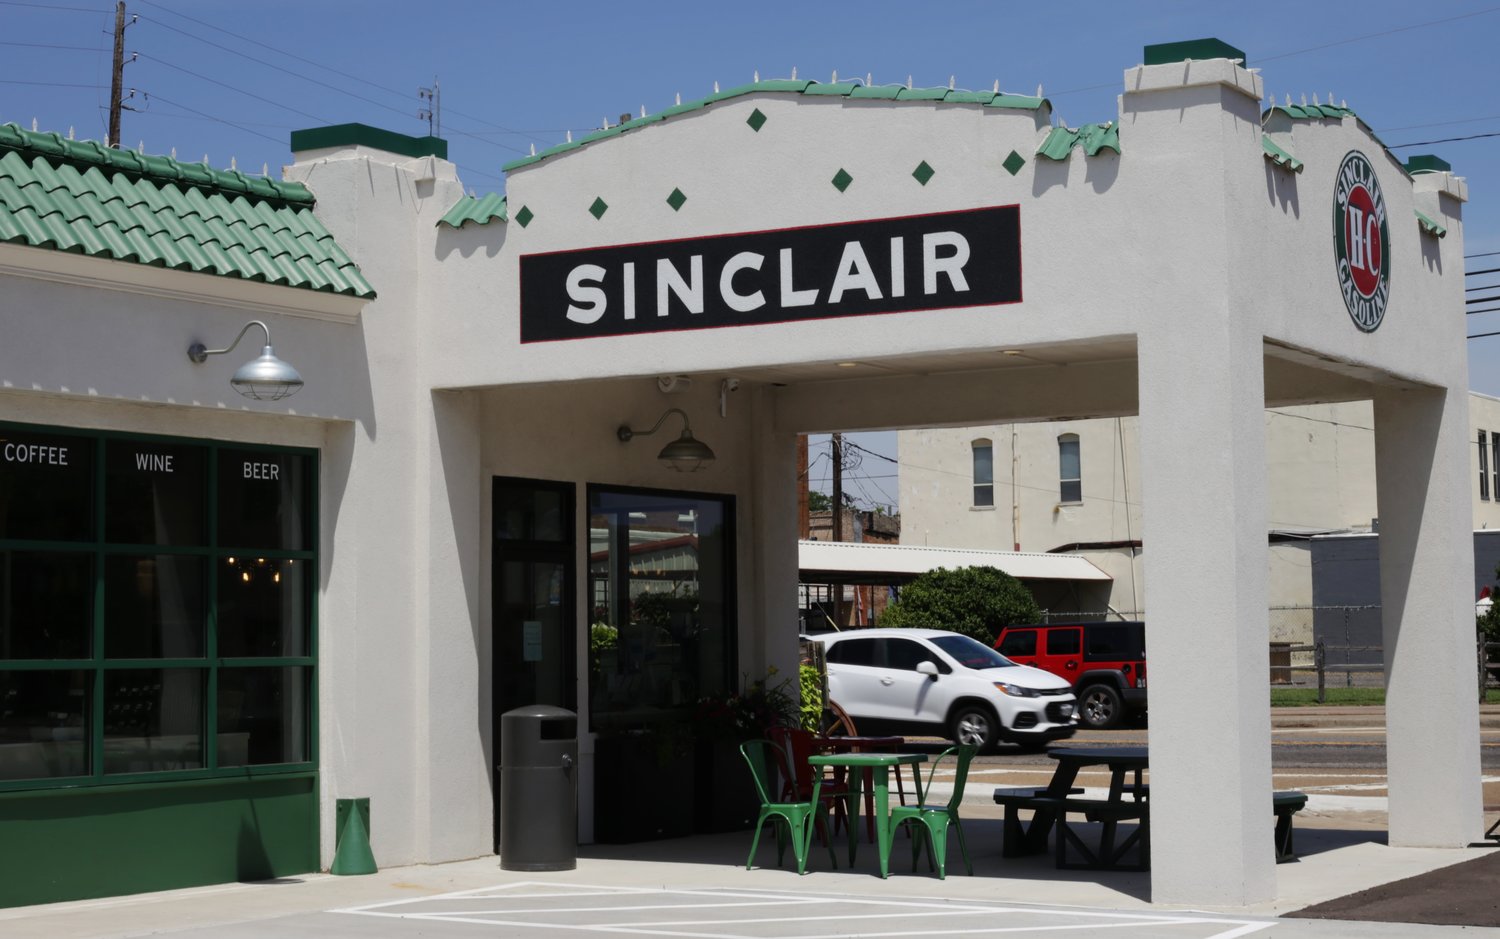 The Sinclair Market at the corner of  TX 11 and TX 37 in Winnsboro.